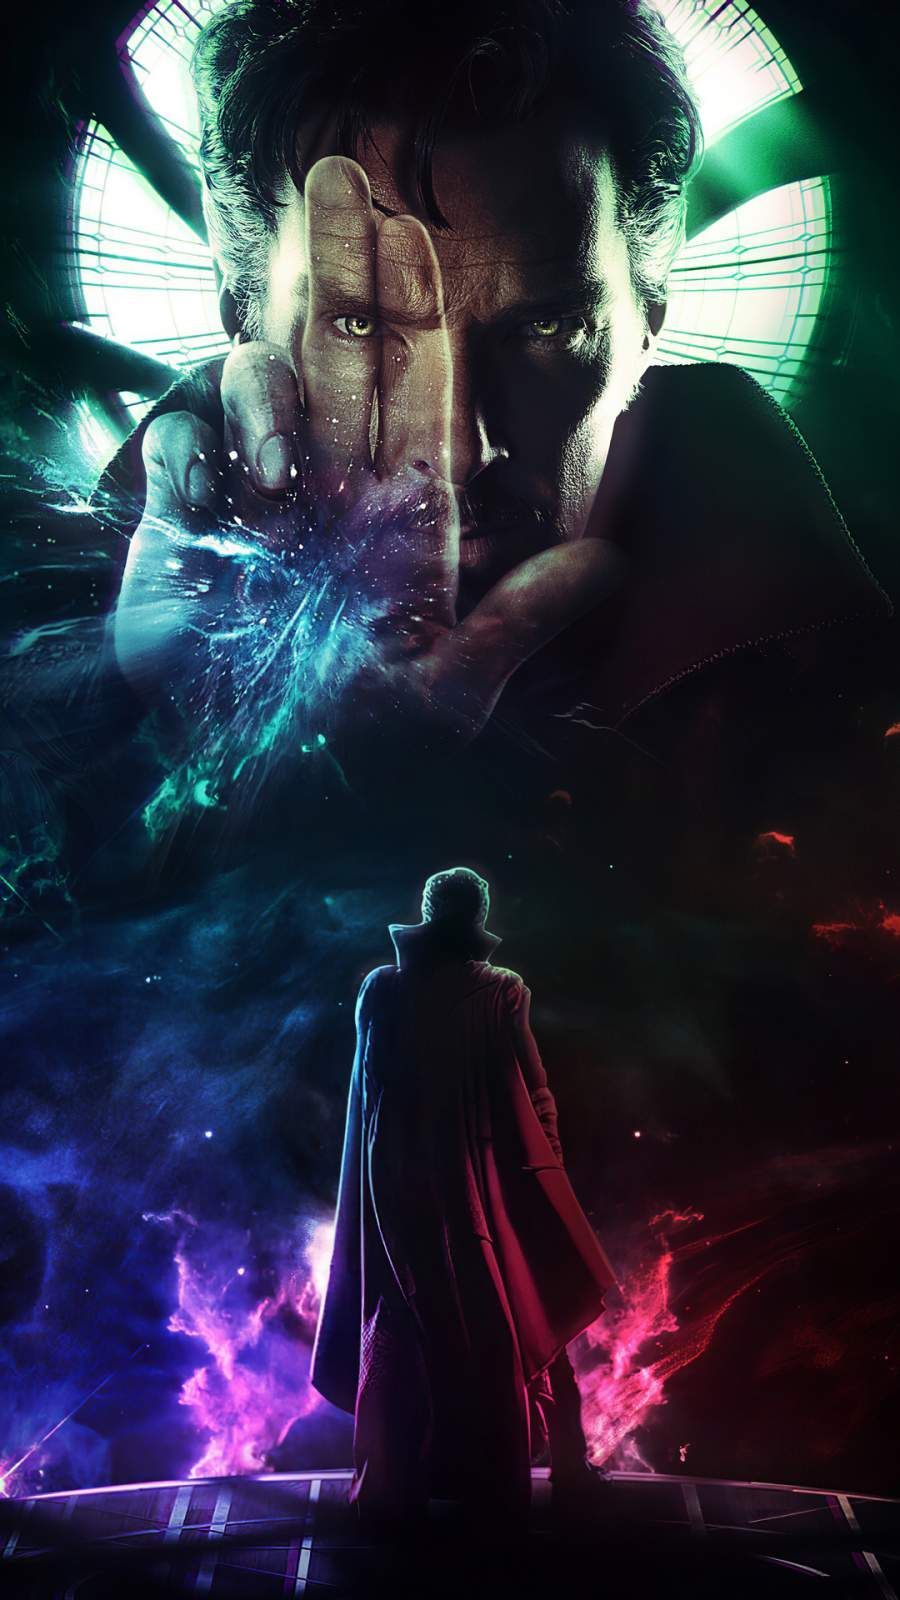 Doctor Strange Multiverse of Madness iPhone Wallpaper. Doctor strange, Strange, Marvel posters